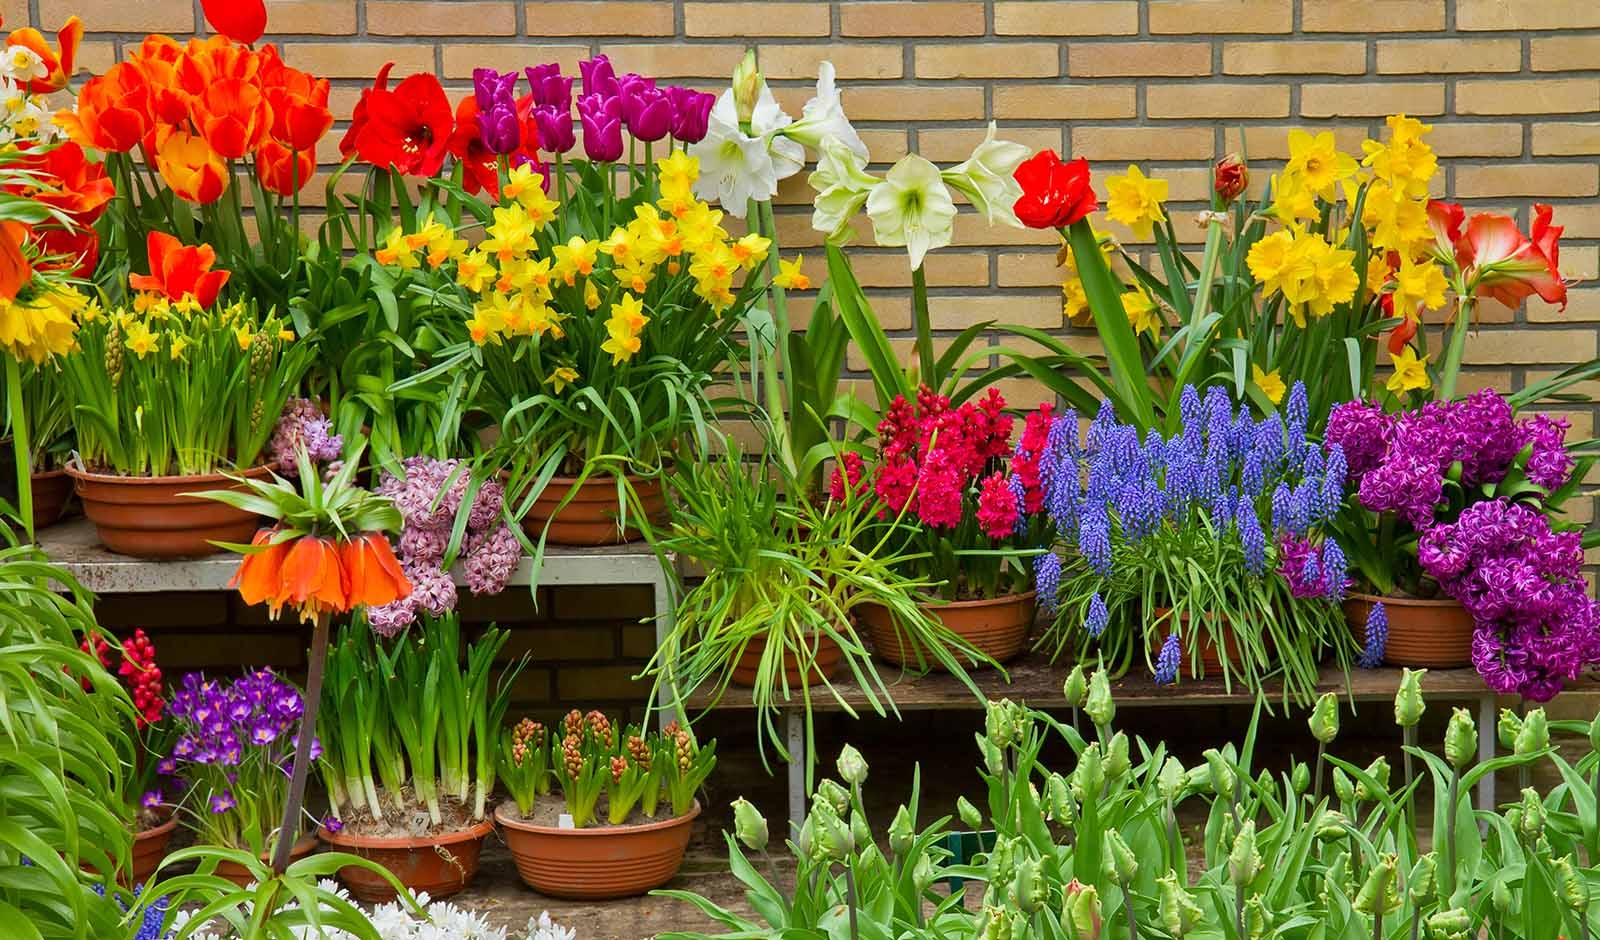 Garden design tips for spring: hyacinth, tulips and daffodil